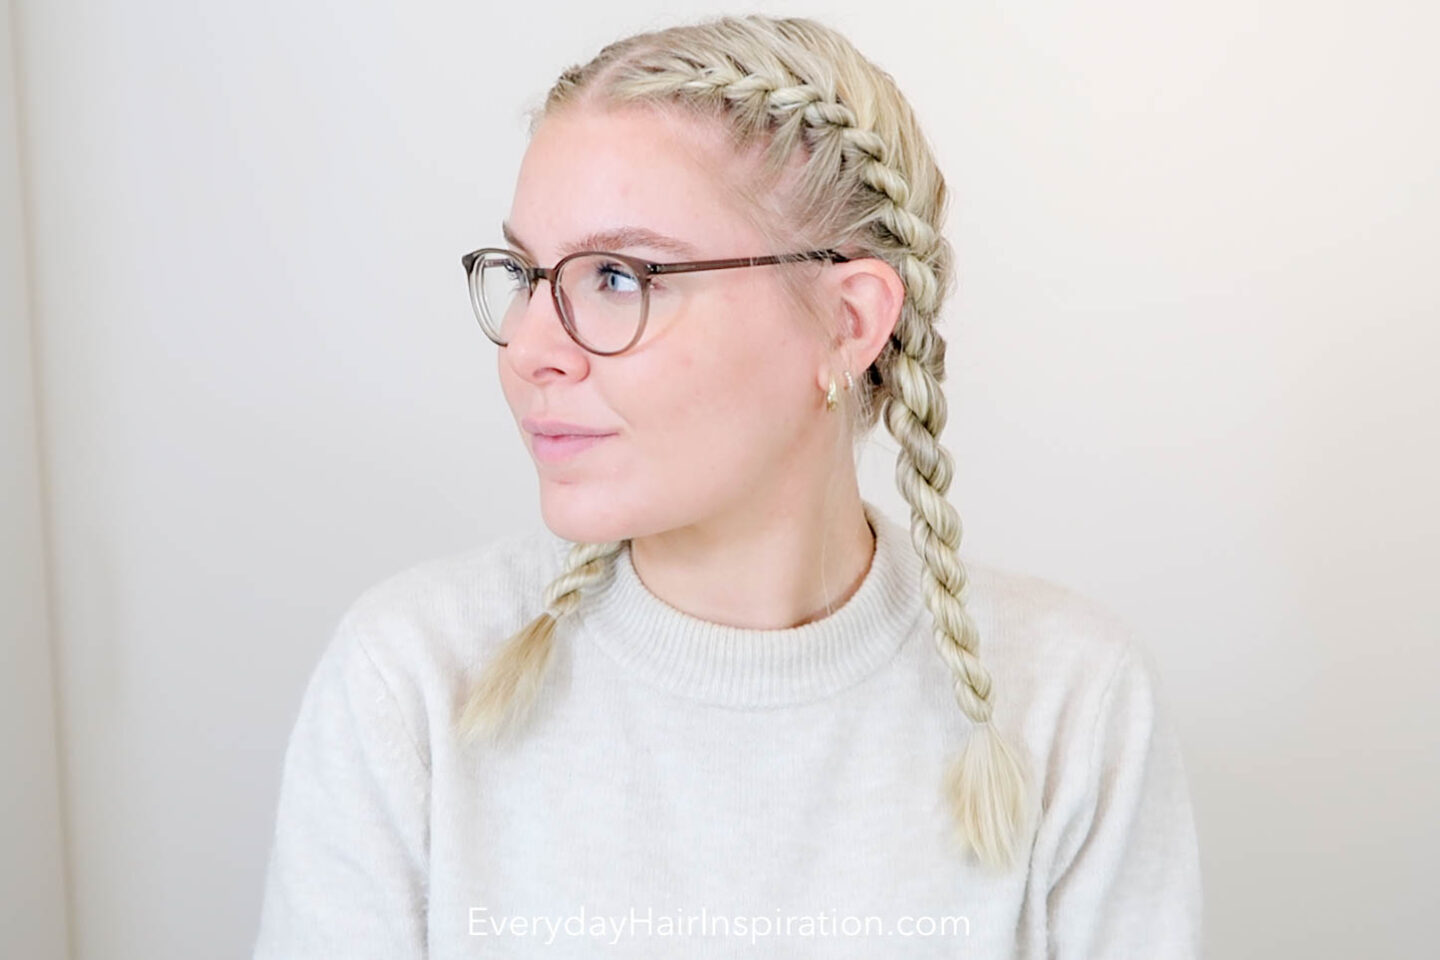 How to do a French Rope Braid - Pigtails & Crewcuts: Marietta - West Cobb